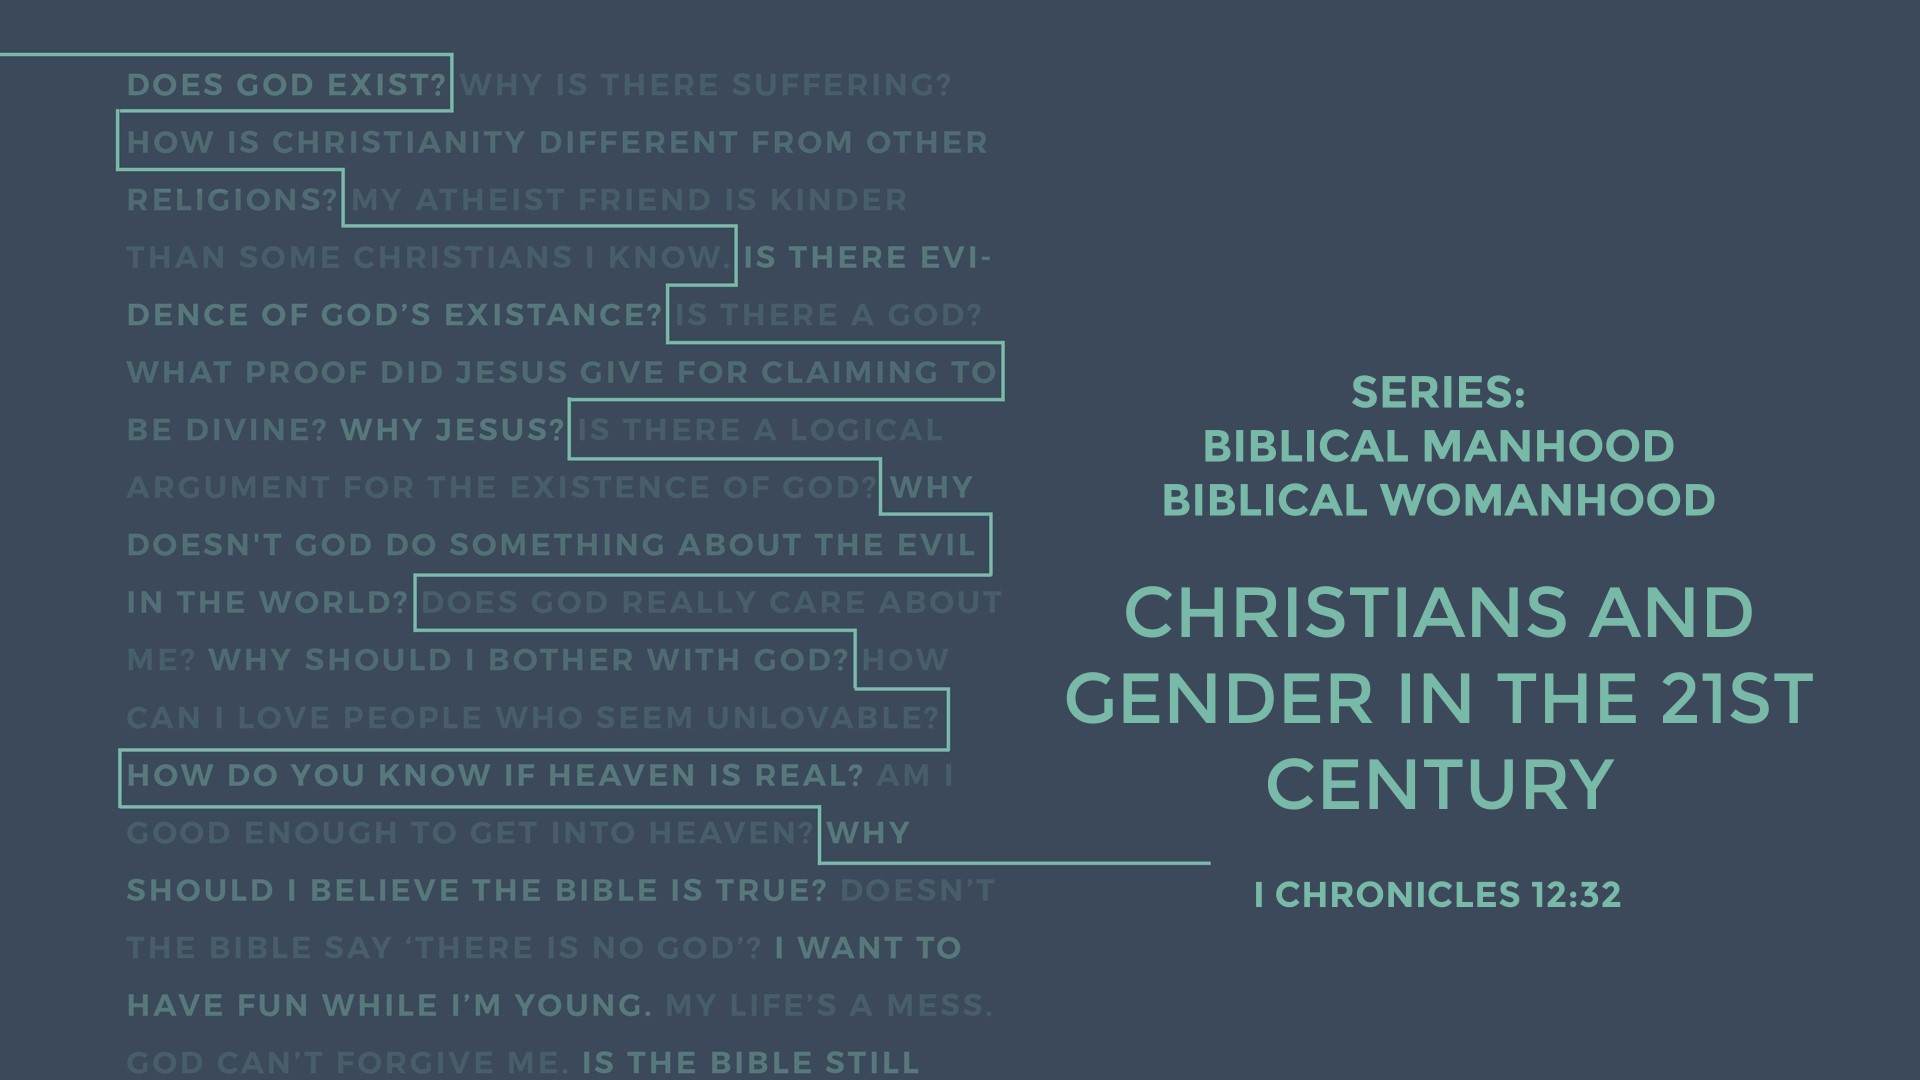 Christians and Gender in the 21st Century